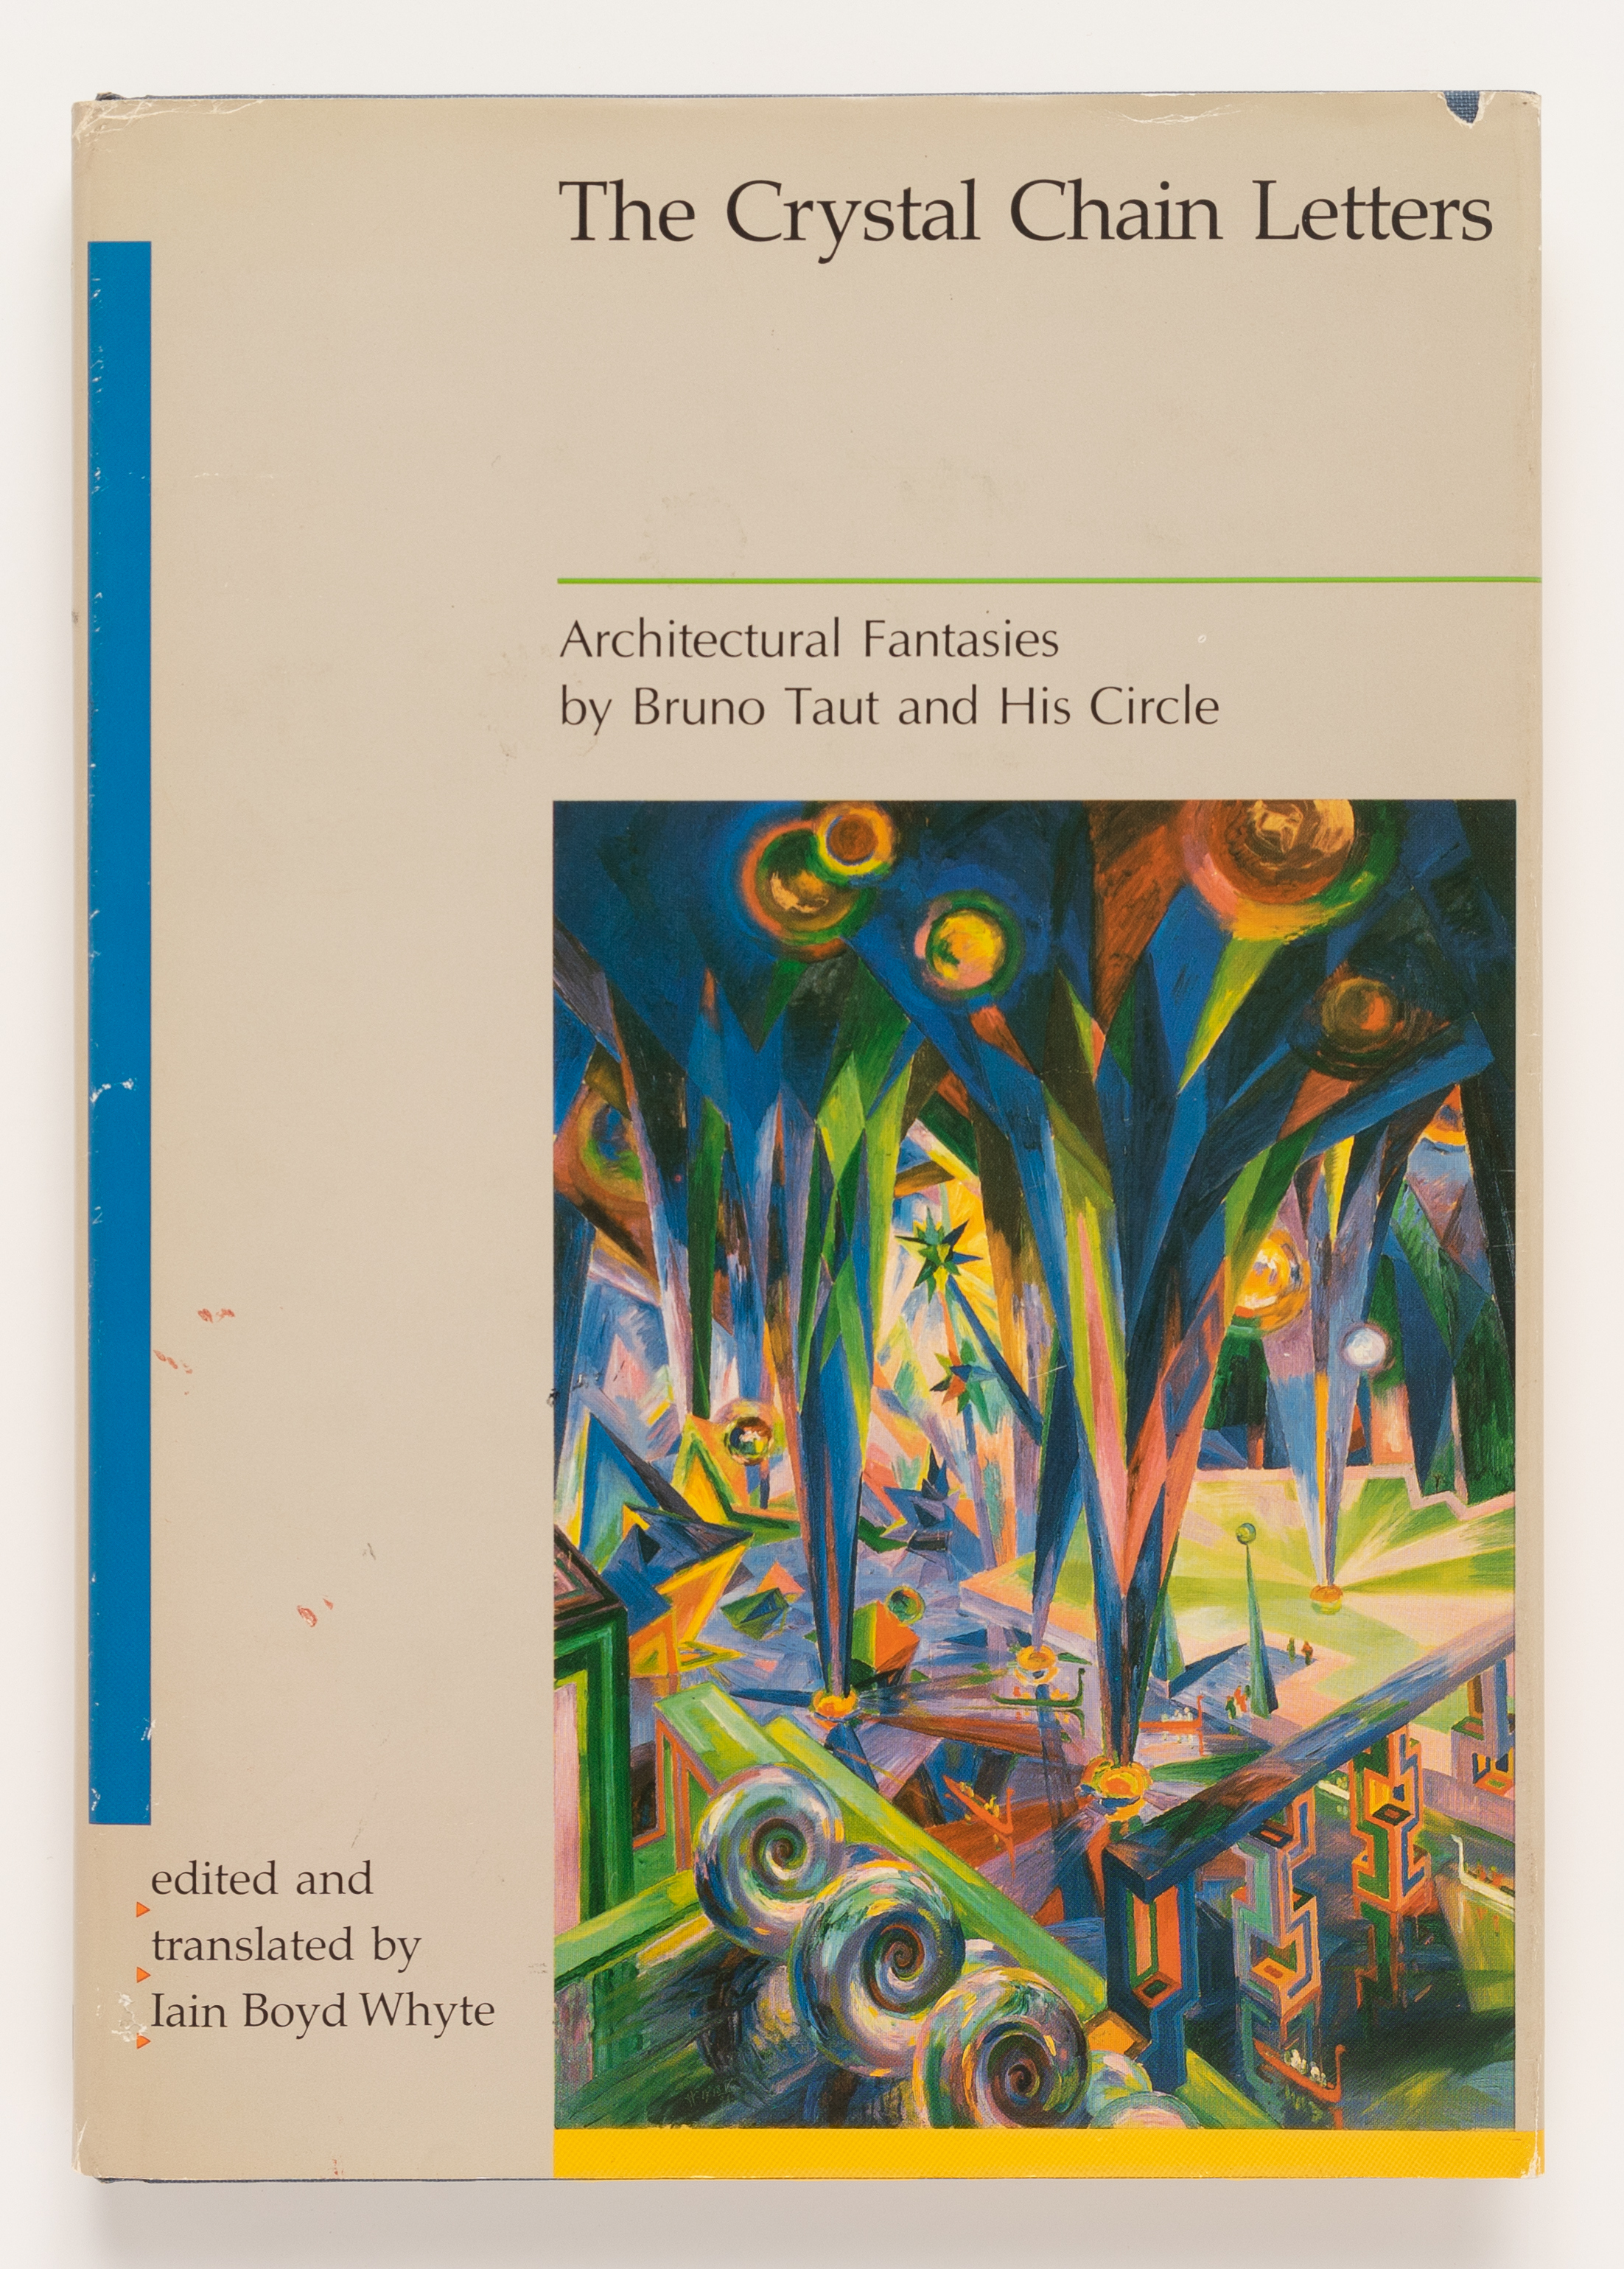 Crystal Chain Letters: Architectural Fantasies by Bruno Taut and His Circle - Iain Boyd Whyte, Bruno Taut, Hermann Finsterlin, Wenzel Hablik, Wassili Luckhardt, Otto Grone, Hans Scharoun, Paul Groesch